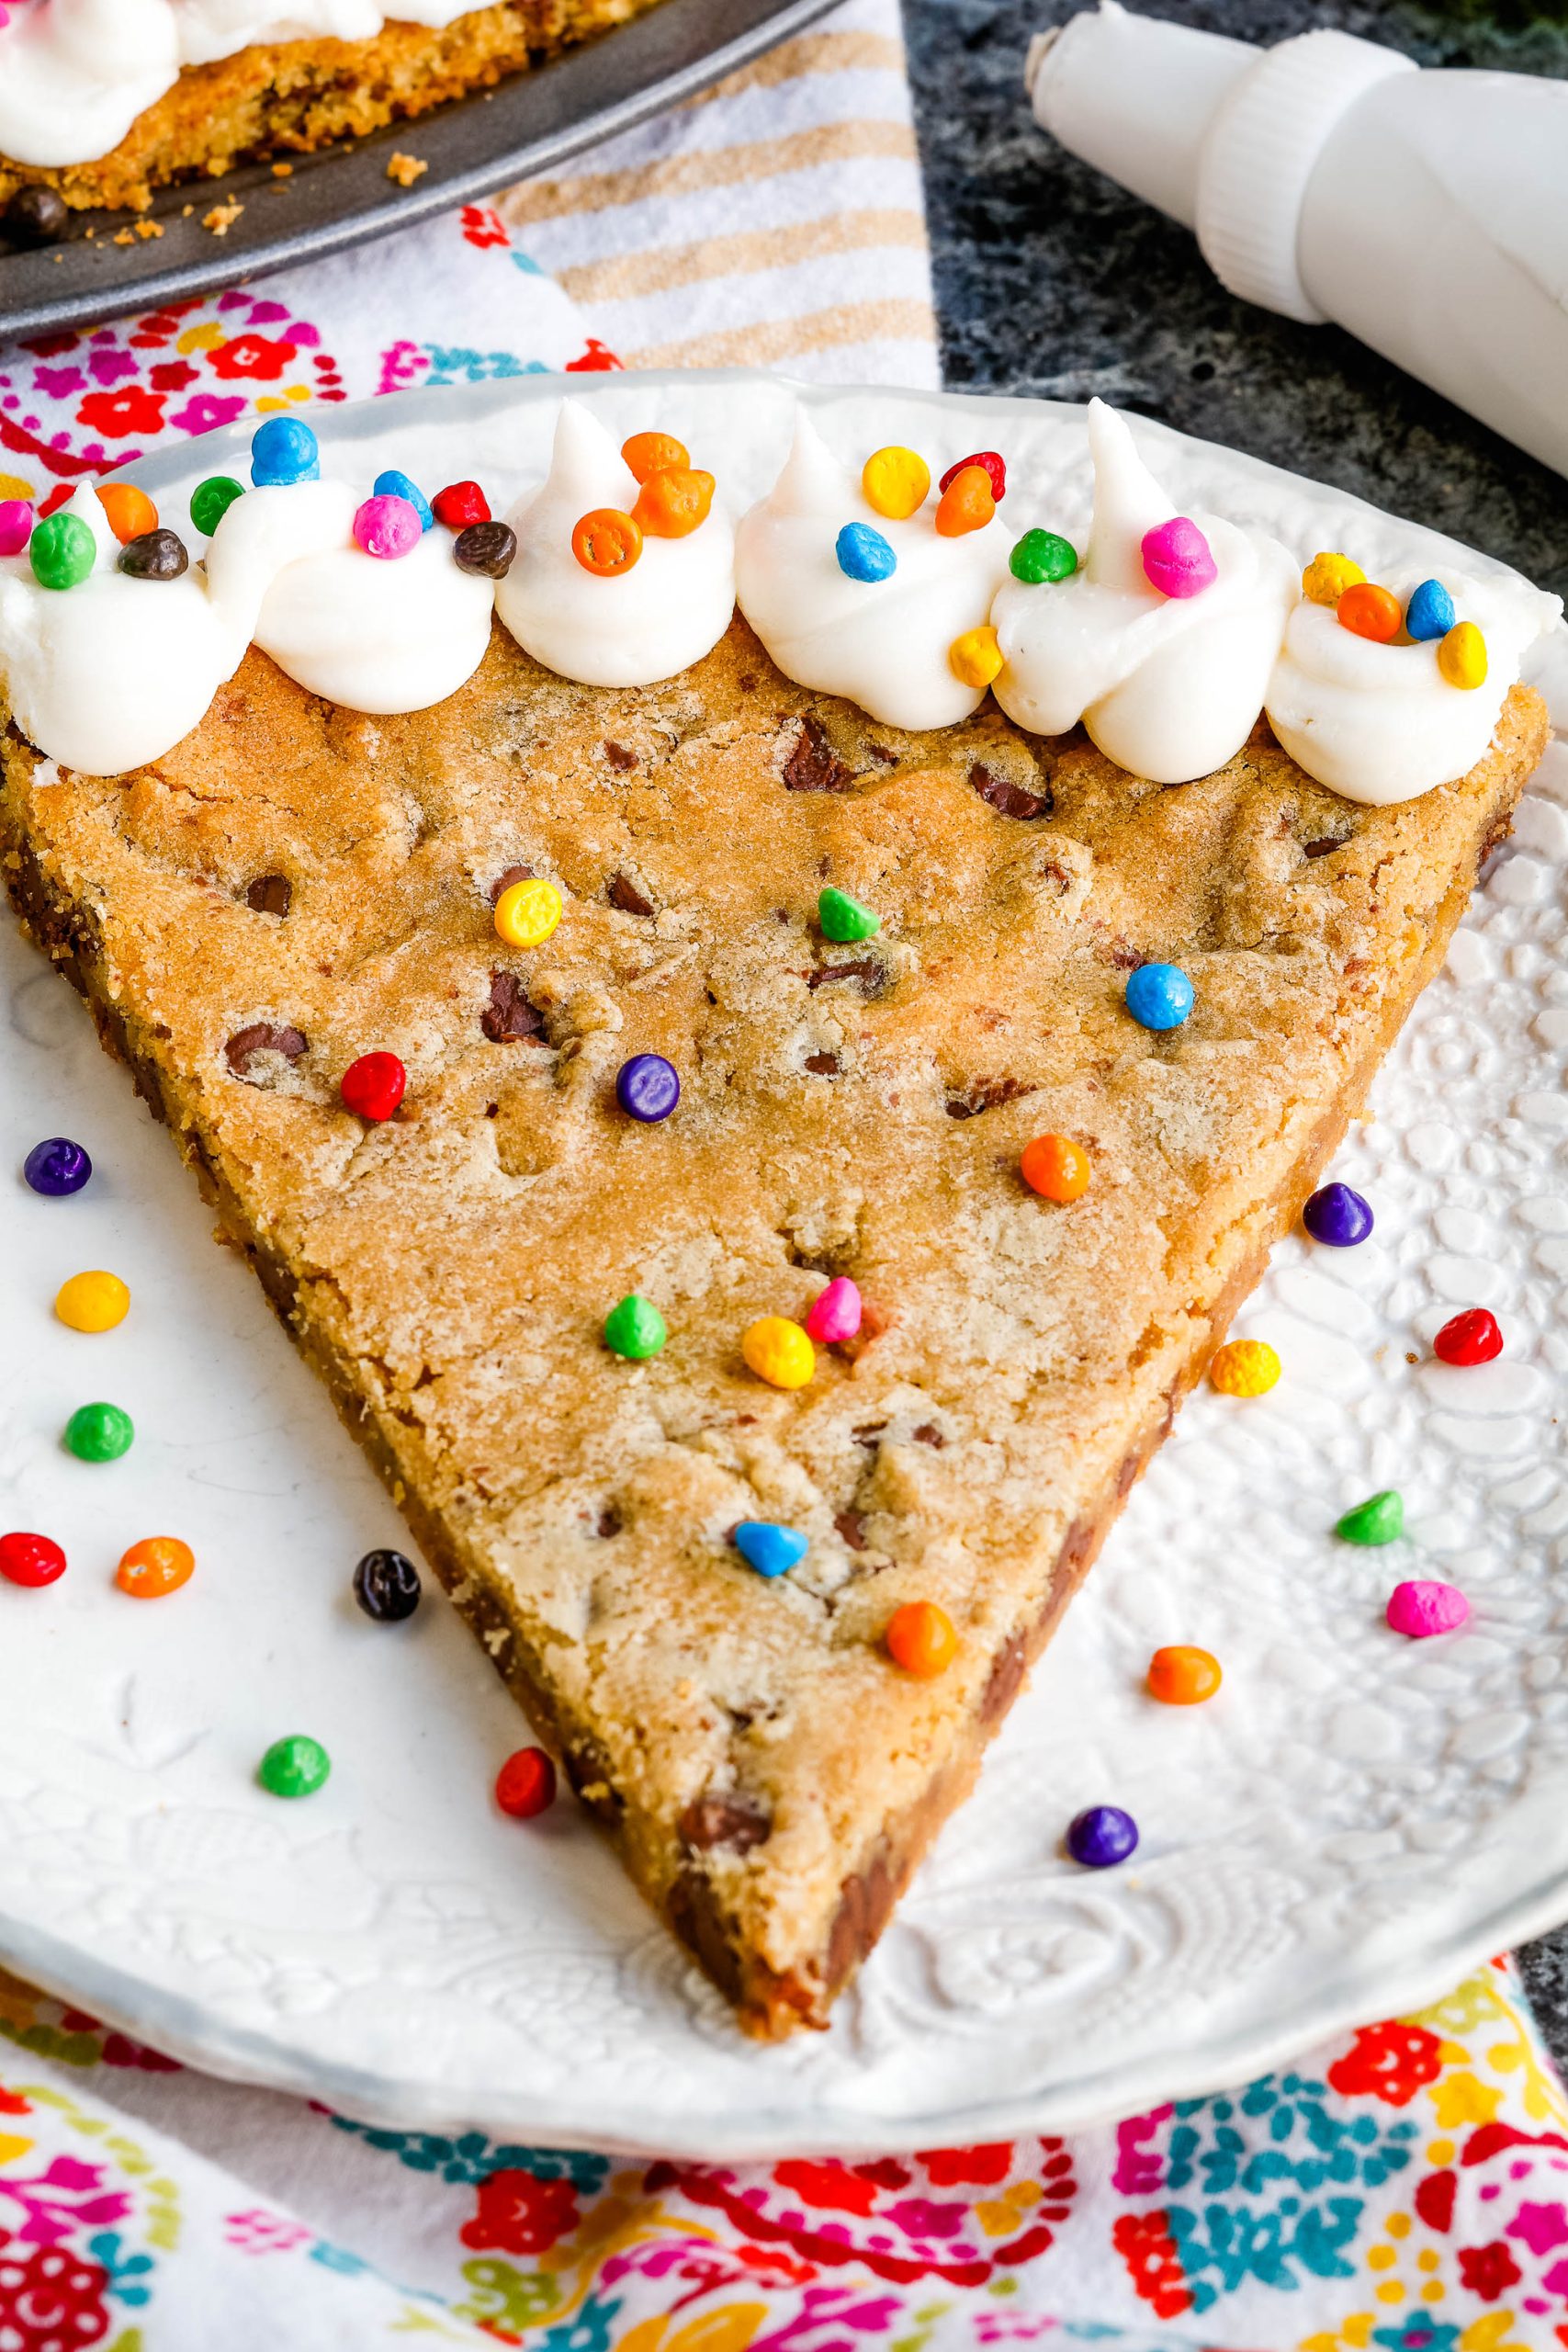 A slice out of a giant chocolate chip cookie on a plate.